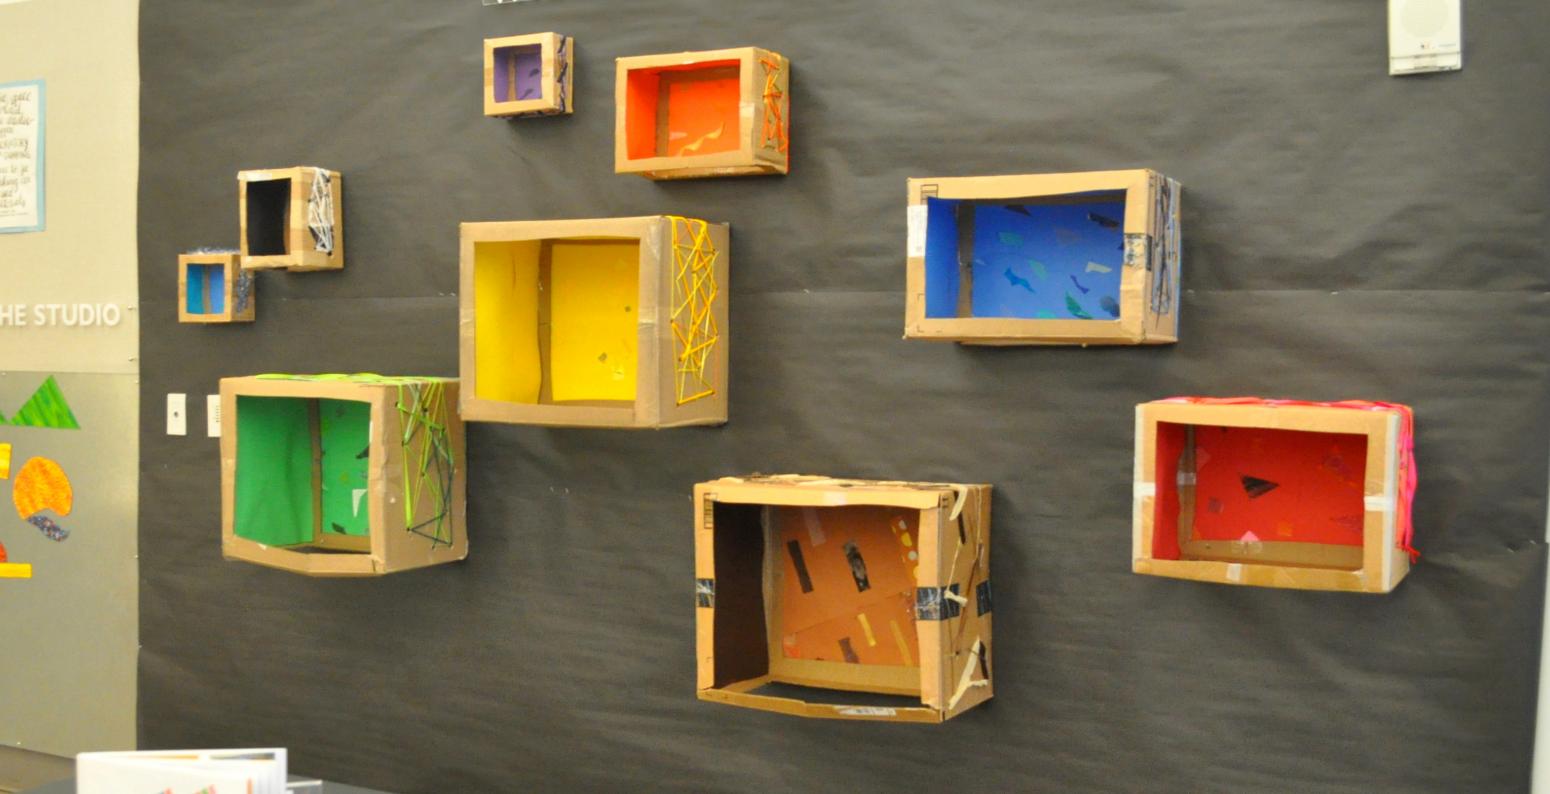 Eight cardboard puppet theaters attached to a display wall, each with a different colored background inside.